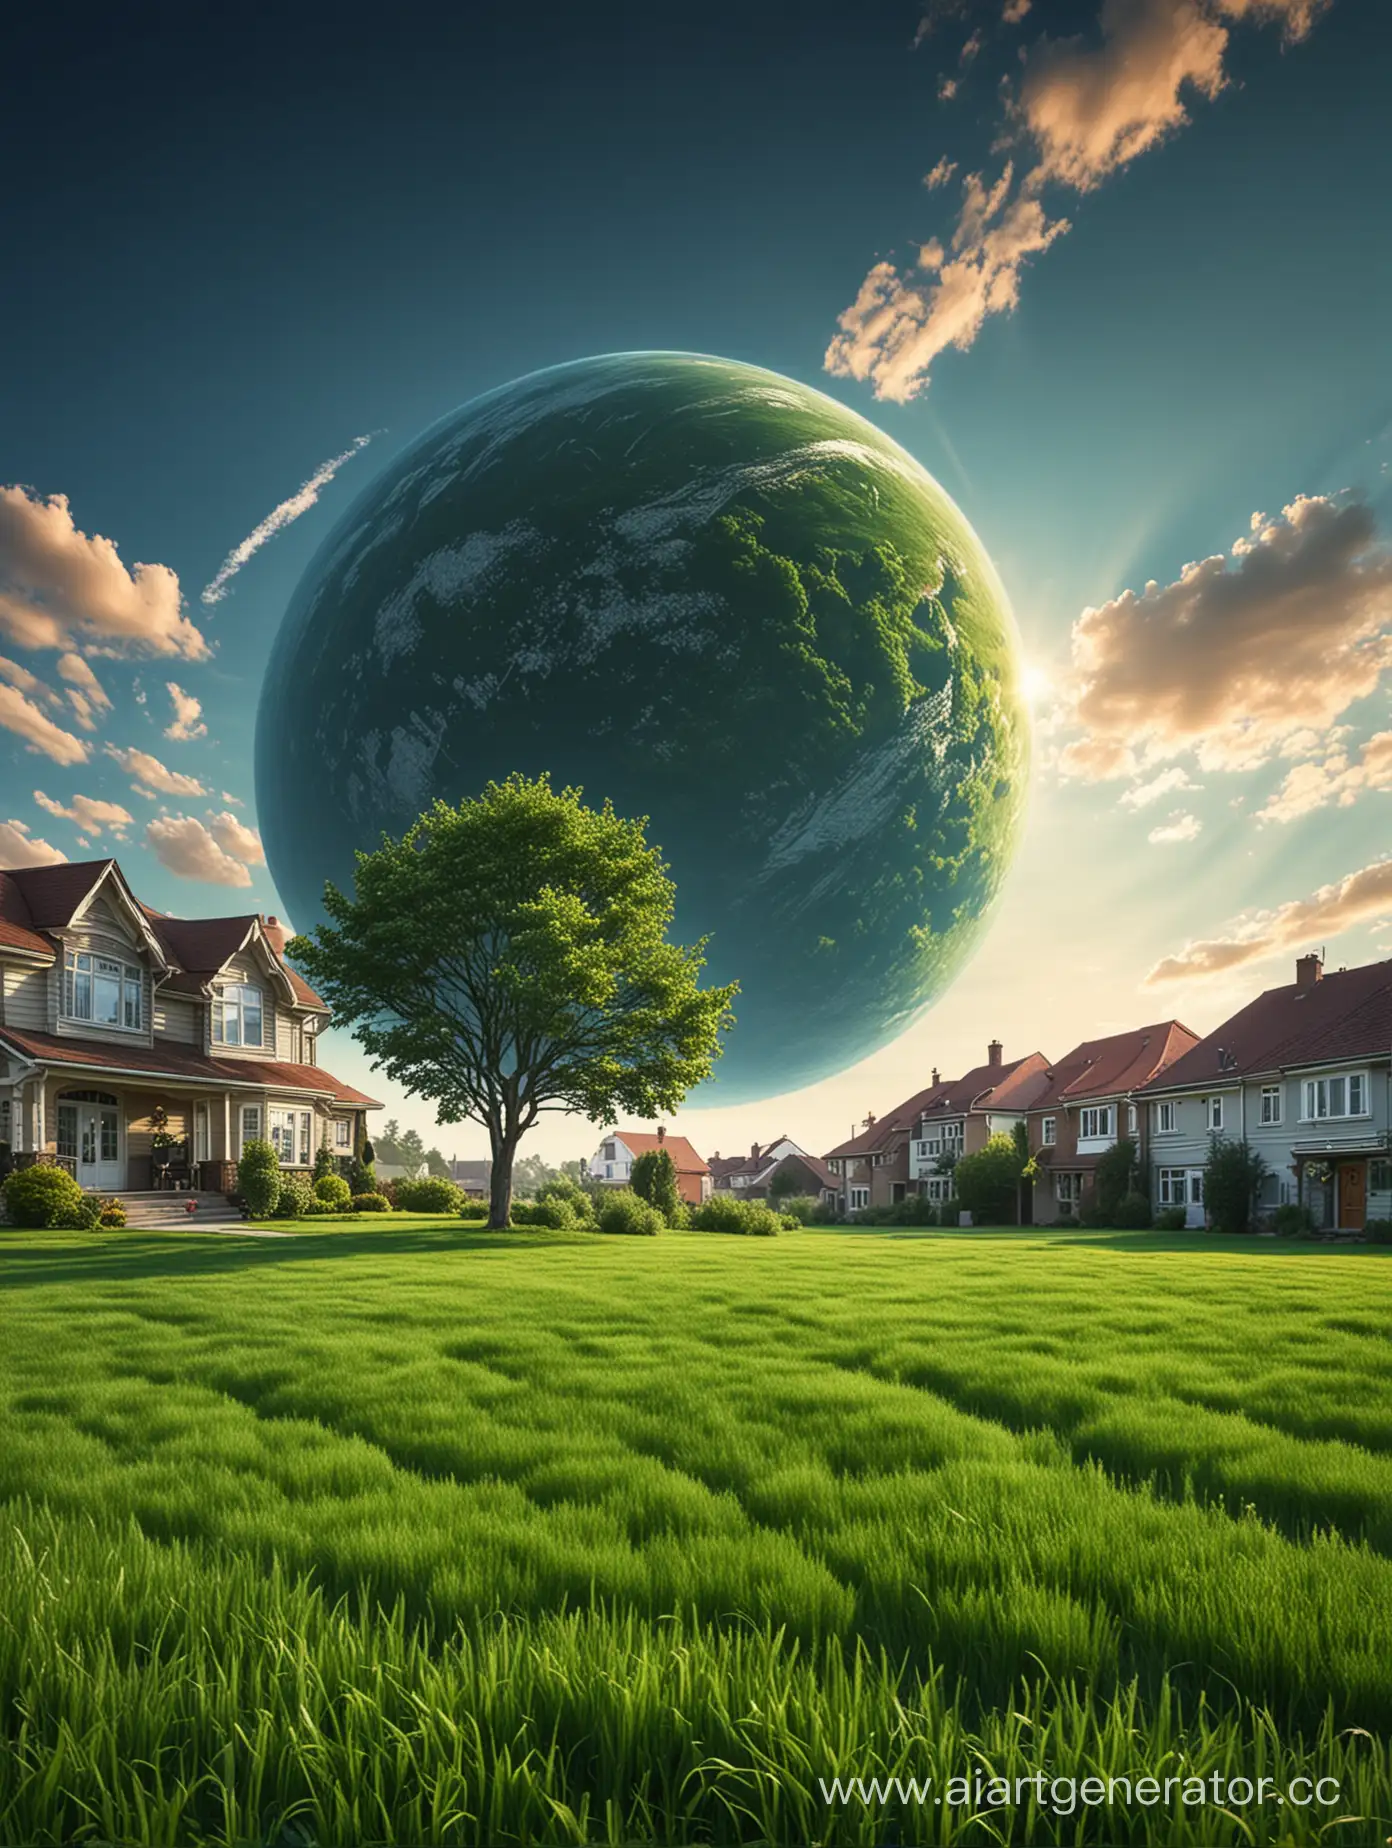 House-by-the-Grass-with-a-Giant-Planet-in-the-Sky